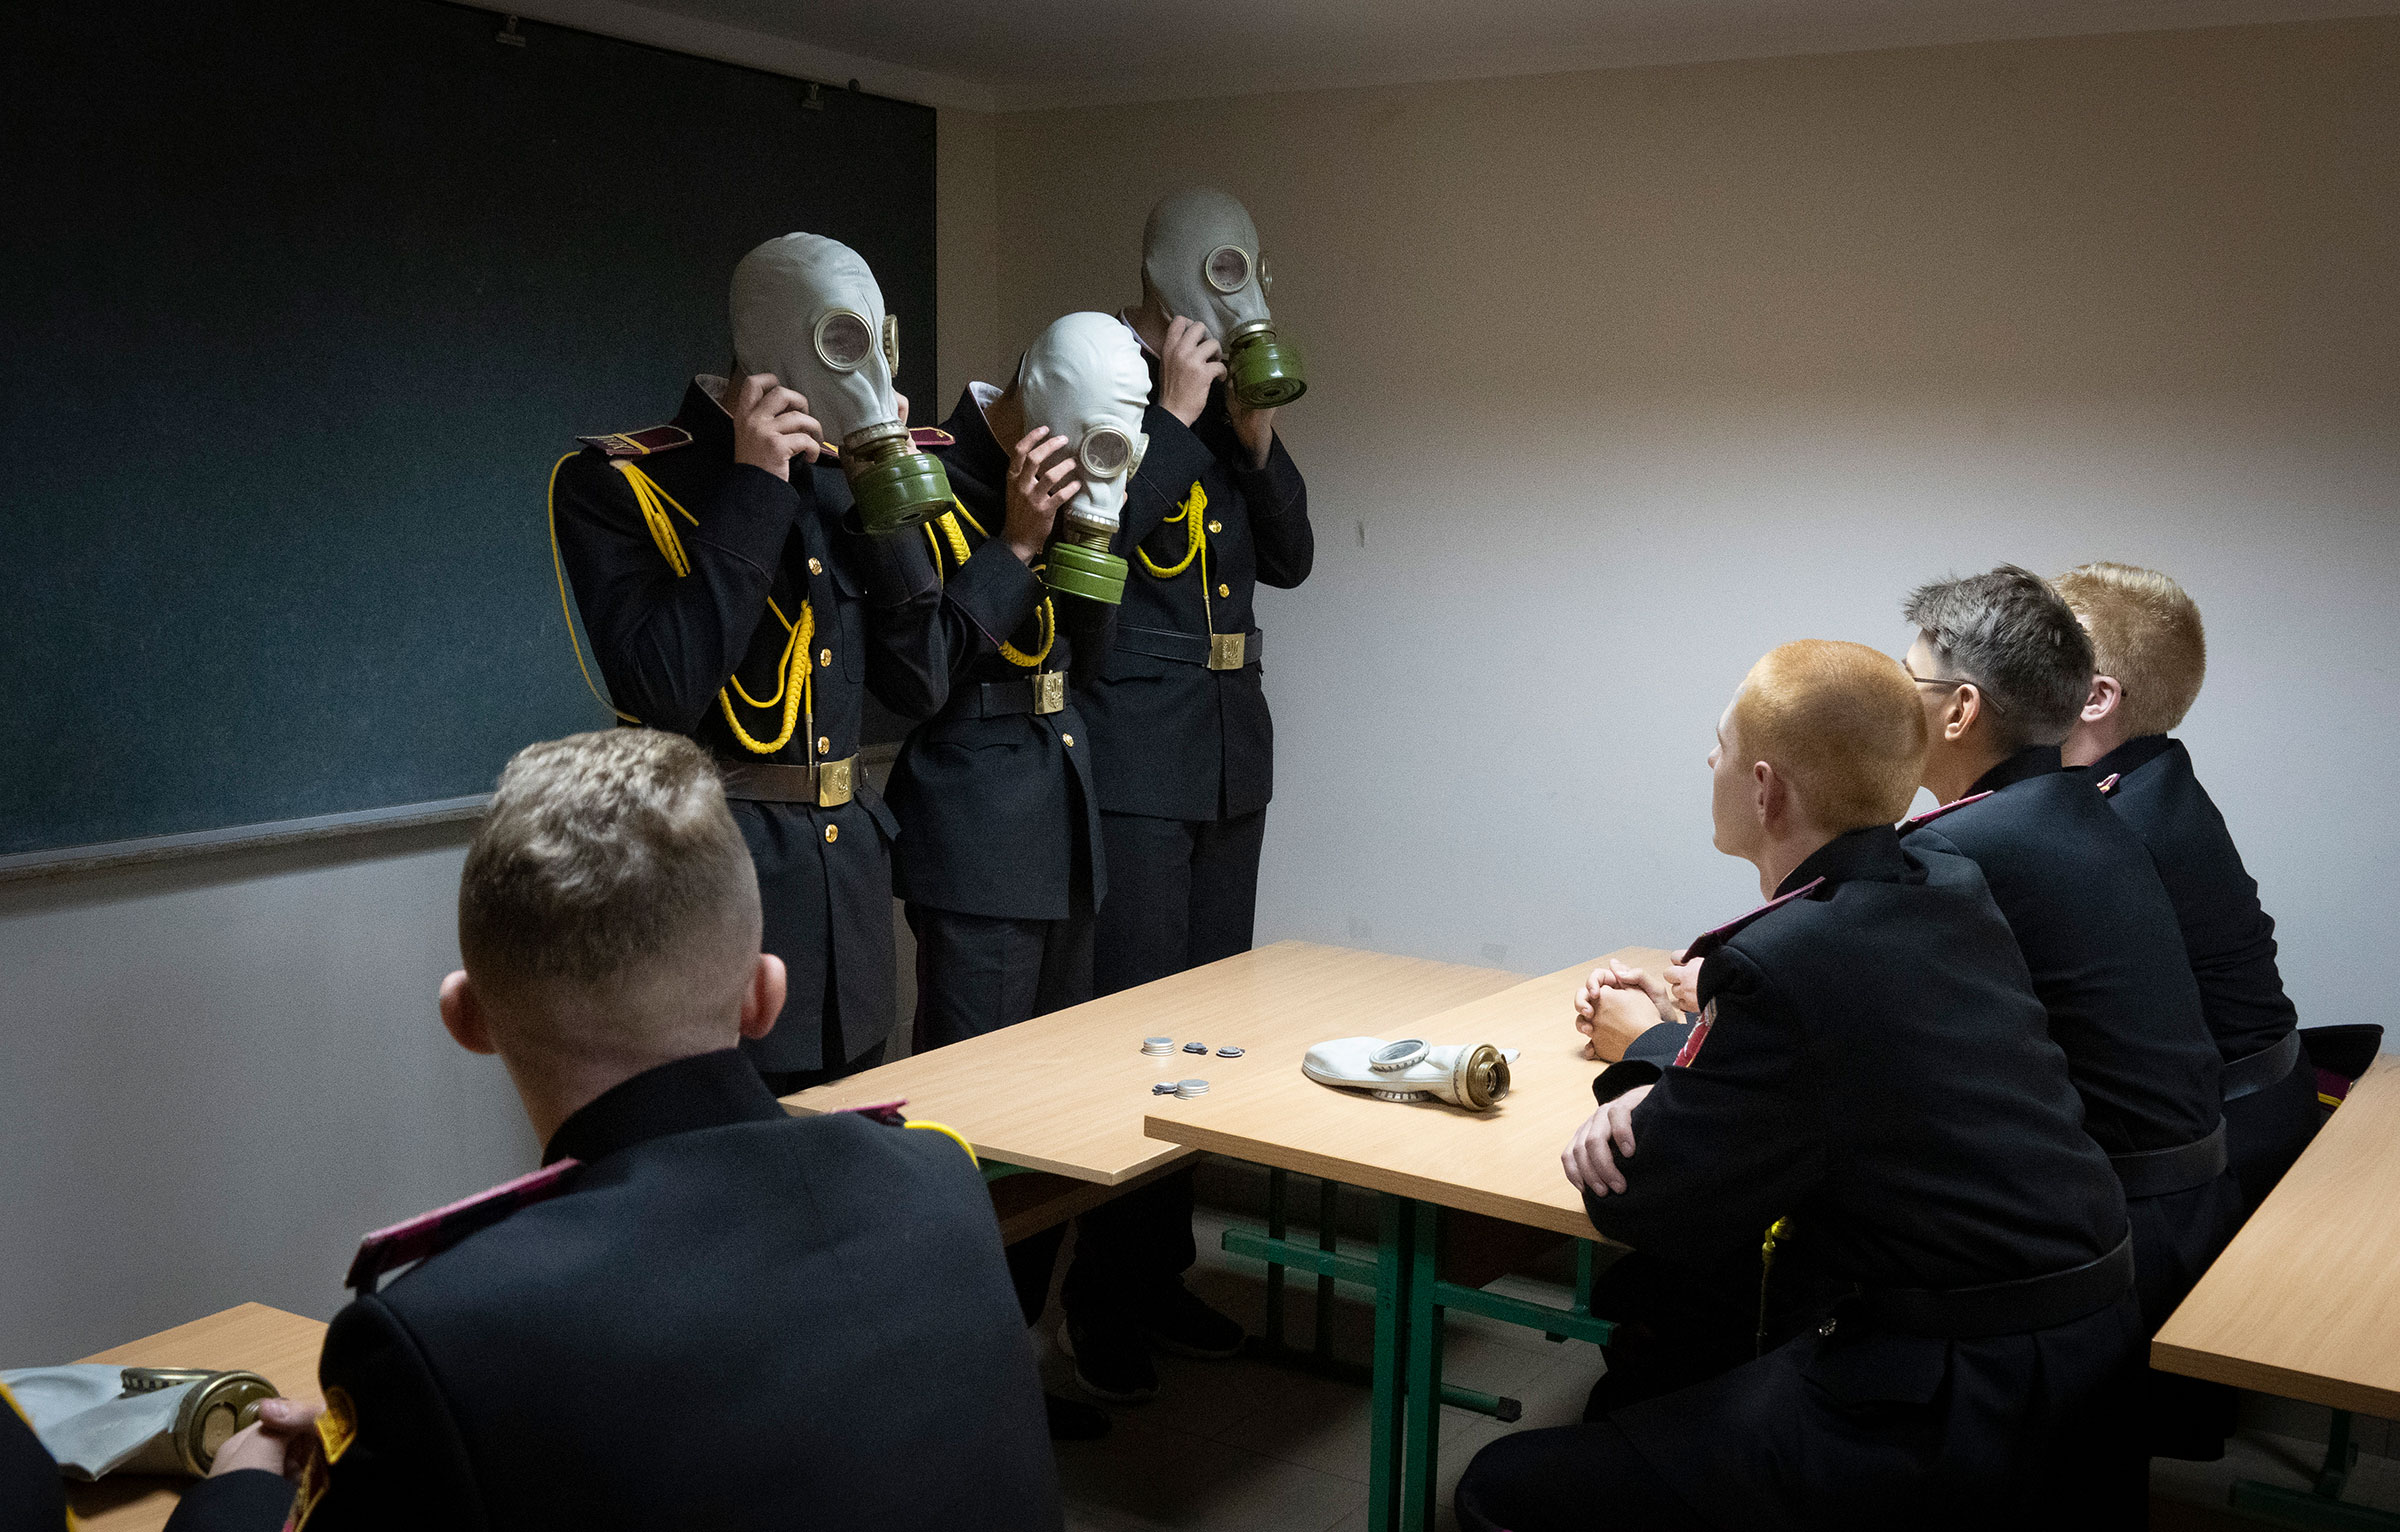 Cadets practice an emergency situation during a lesson in a bomb shelter on the first day of school at a cadet lyceum in Kyiv, Ukraine, on Sept. 1. (Efrem Lukatsky—AP)